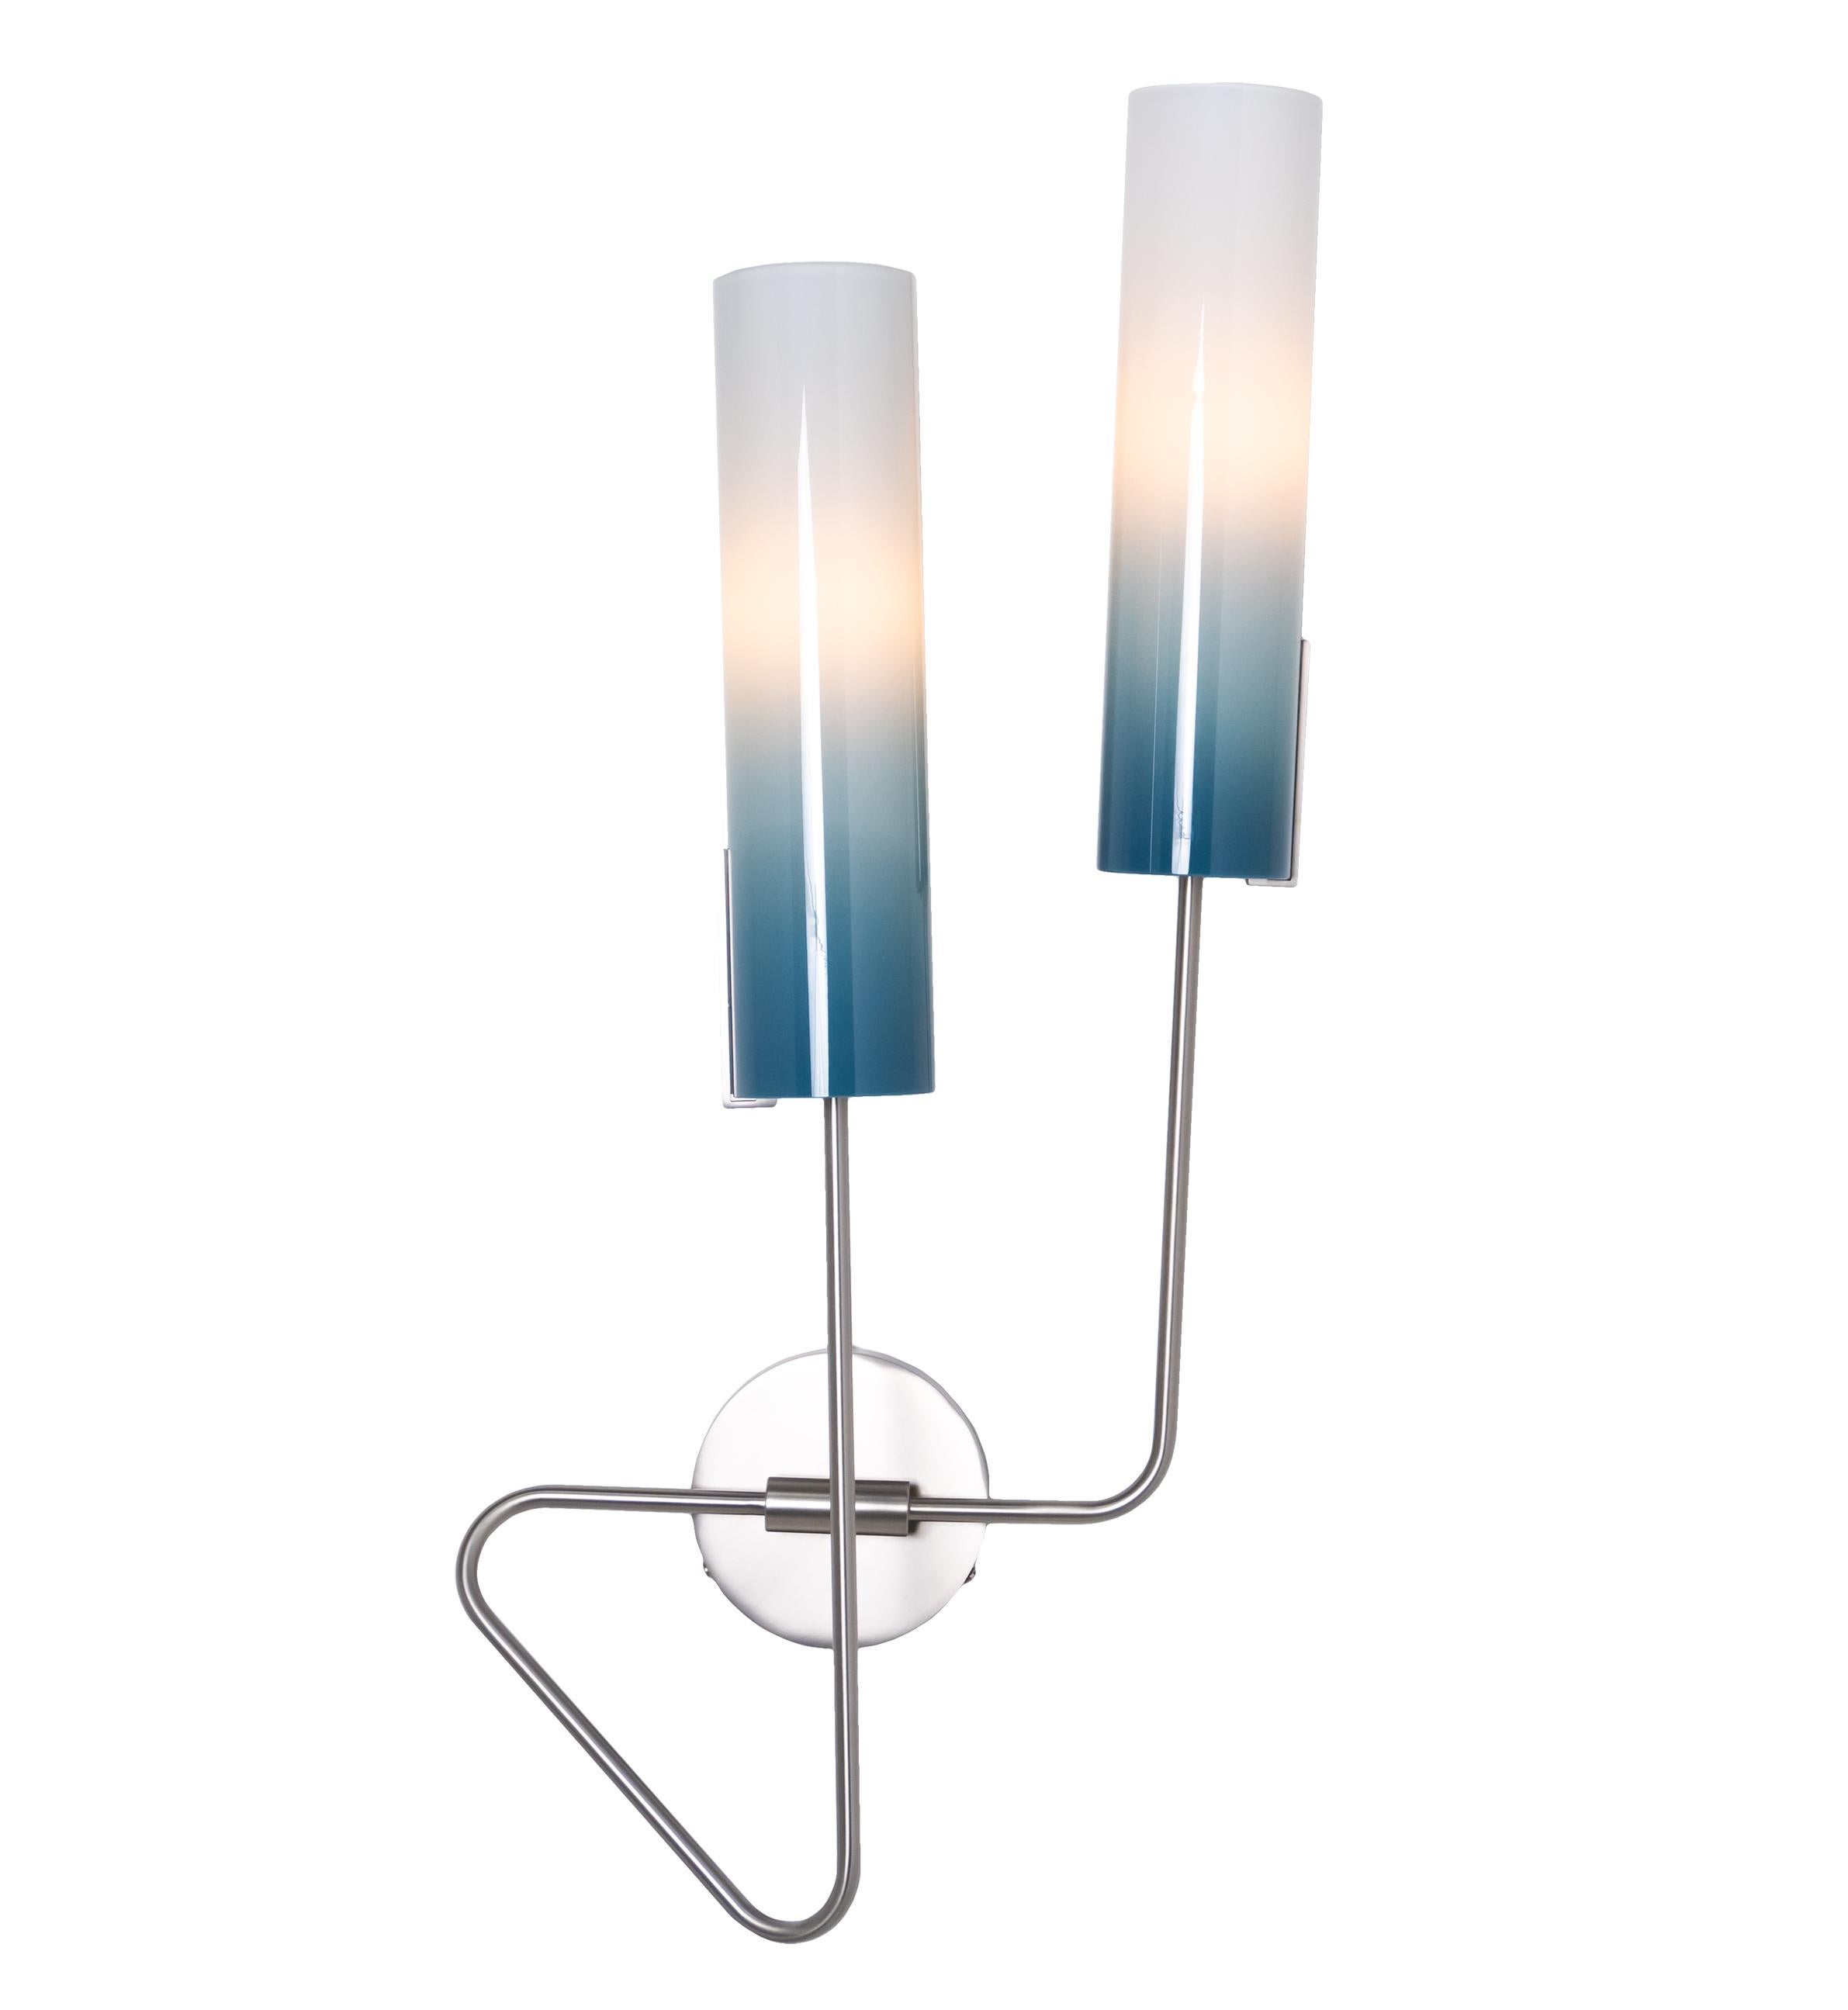 Continuum 01 Sconce: Satin Nickel/Pink Glass Shades by Avram Rusu Studio In New Condition For Sale In Brooklyn, NY